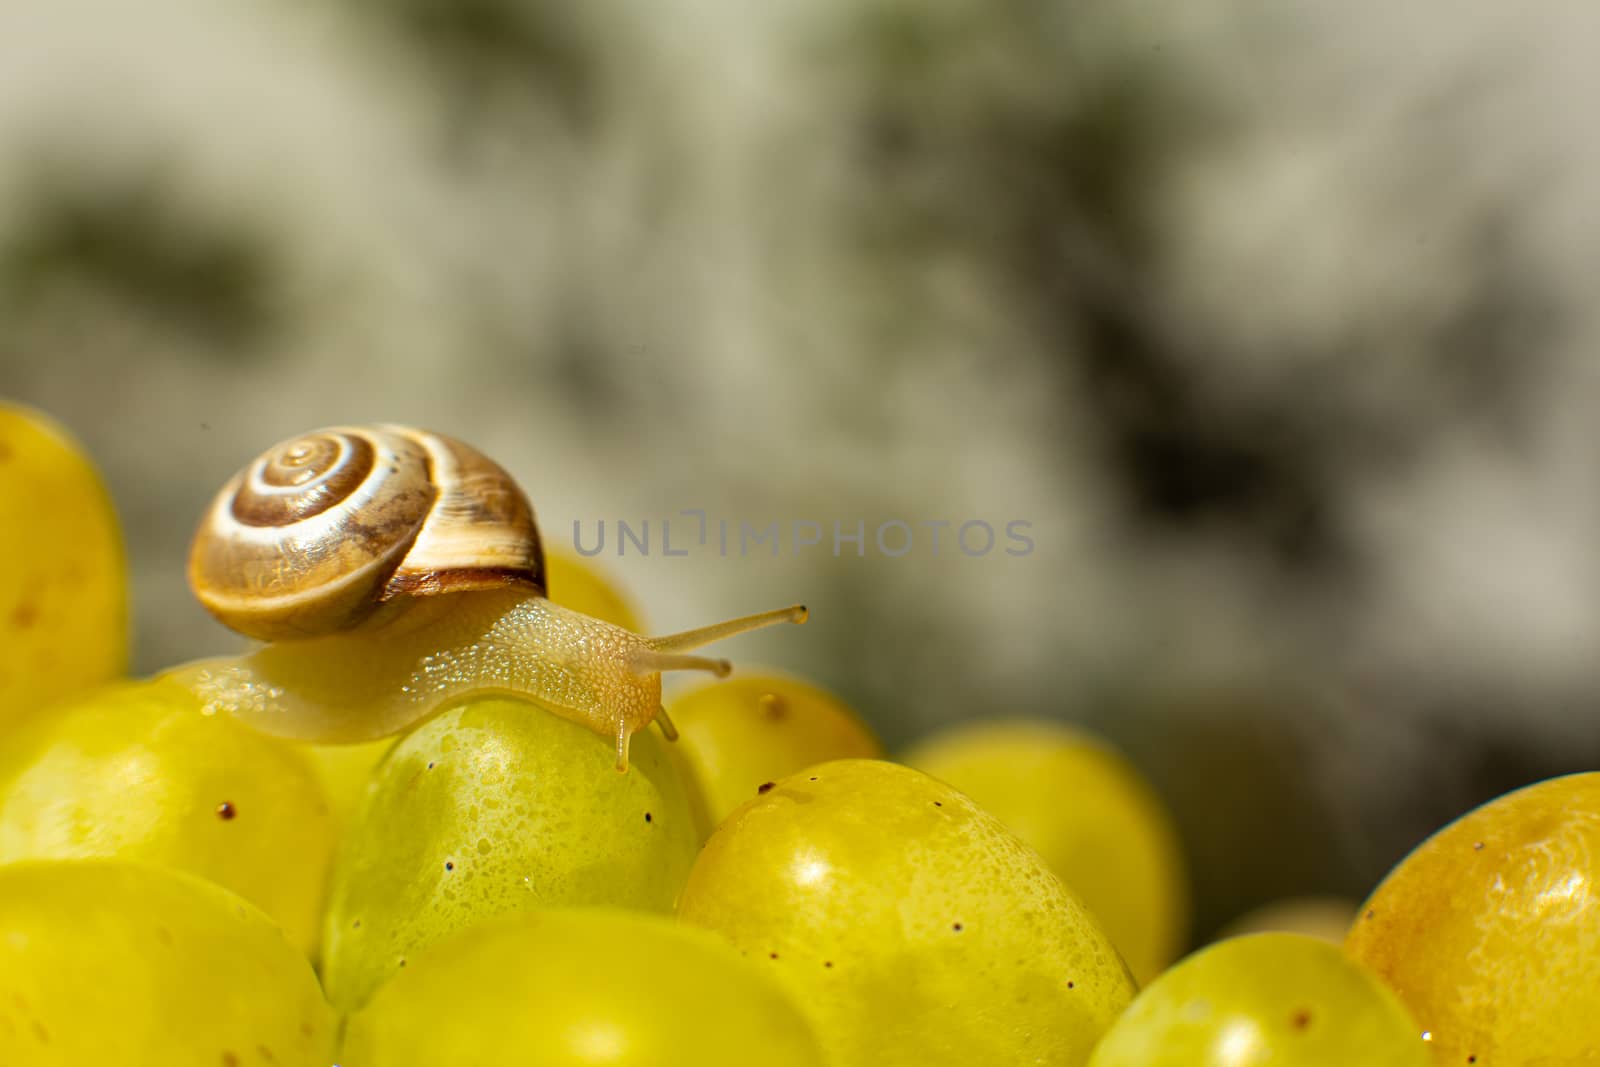 Close-up of a small snail crawling over grapes quiche mish.